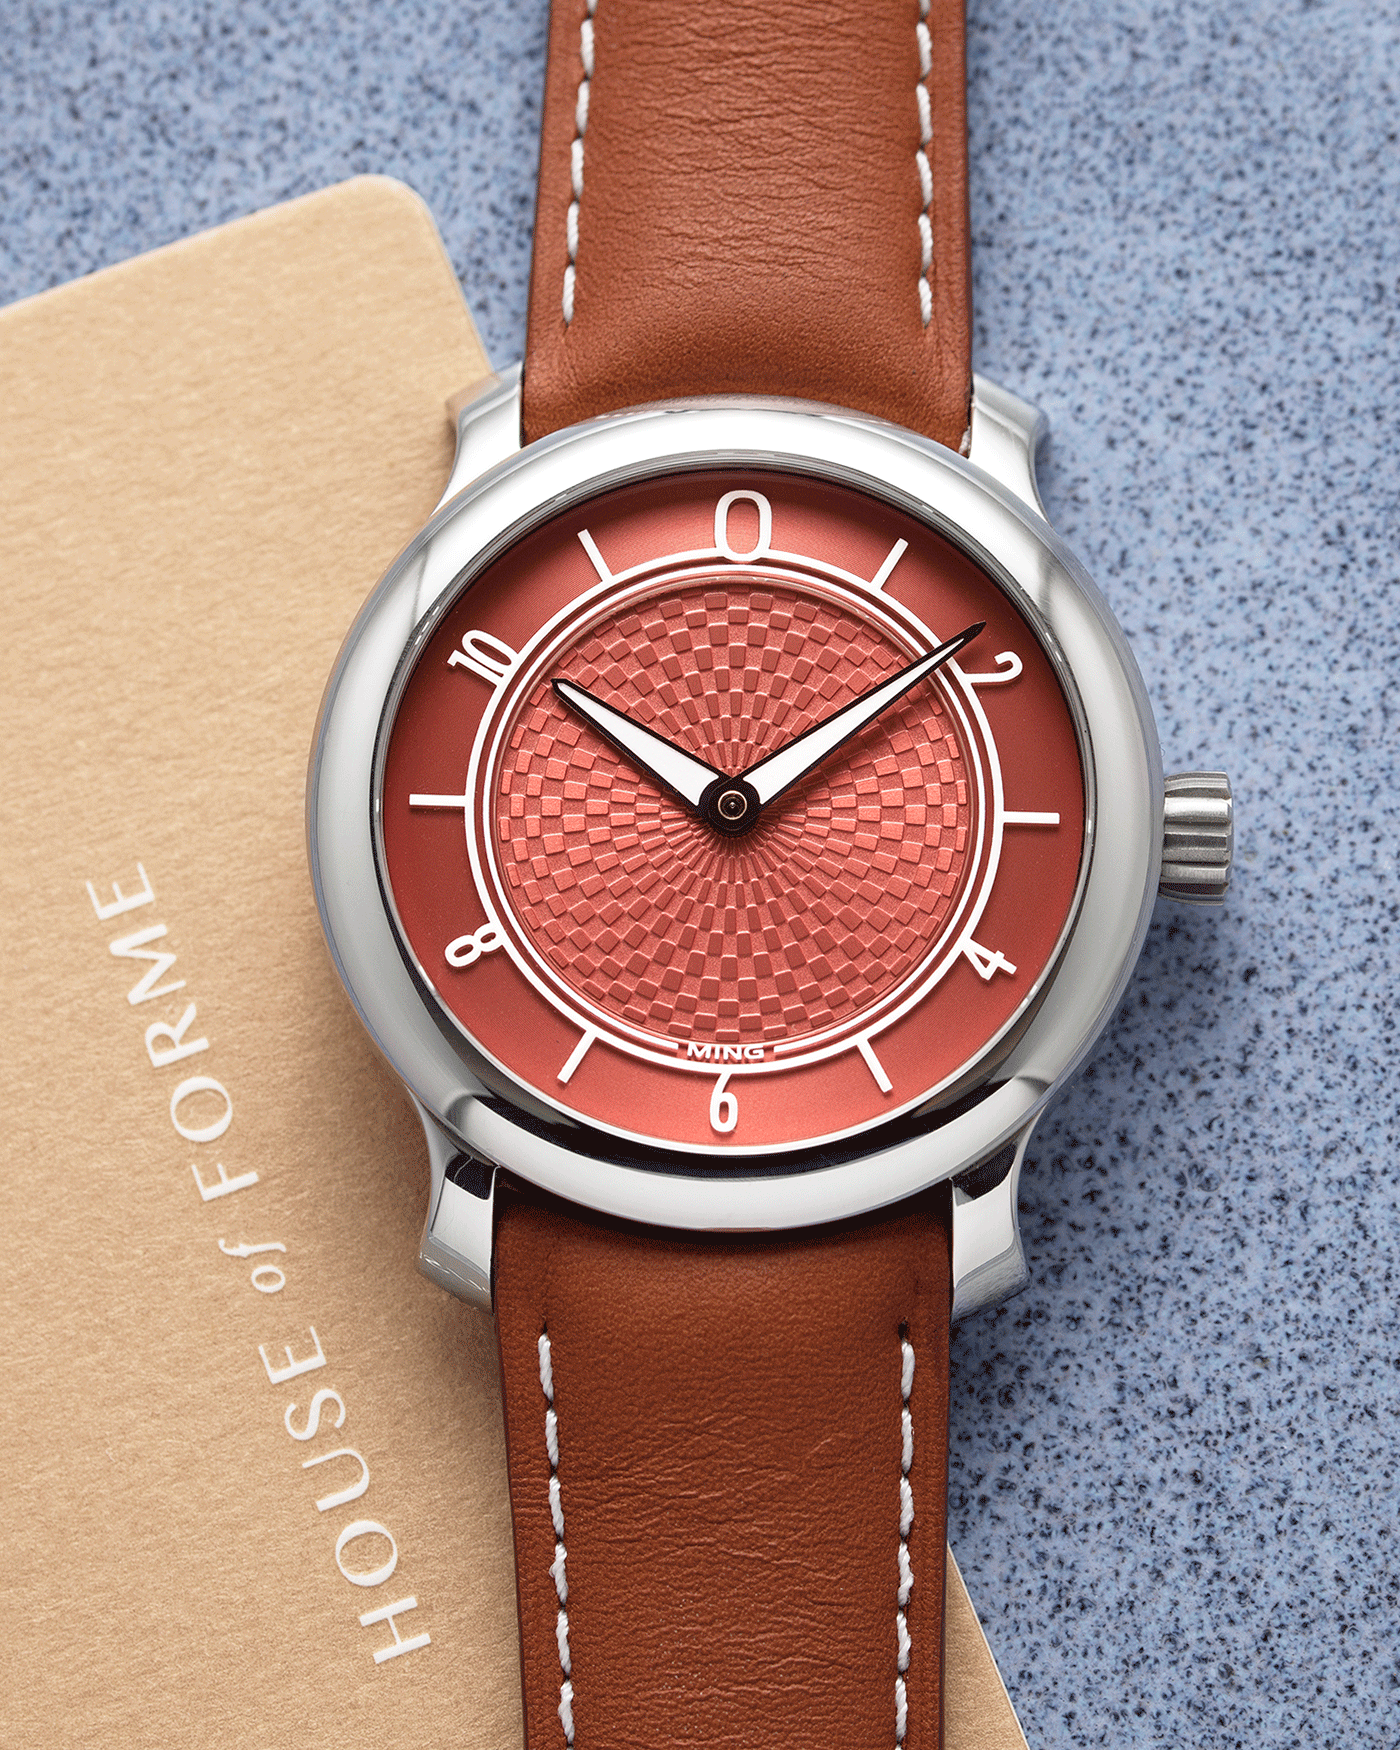 Brand: Ming Year: 2019 Model: 17.06 Material: Stainless Steel Movement: Heavily Modified ETA 2824-2 Case Diameter: 38mm Strap: Jean Rousseau Brown Smooth Calf for MING